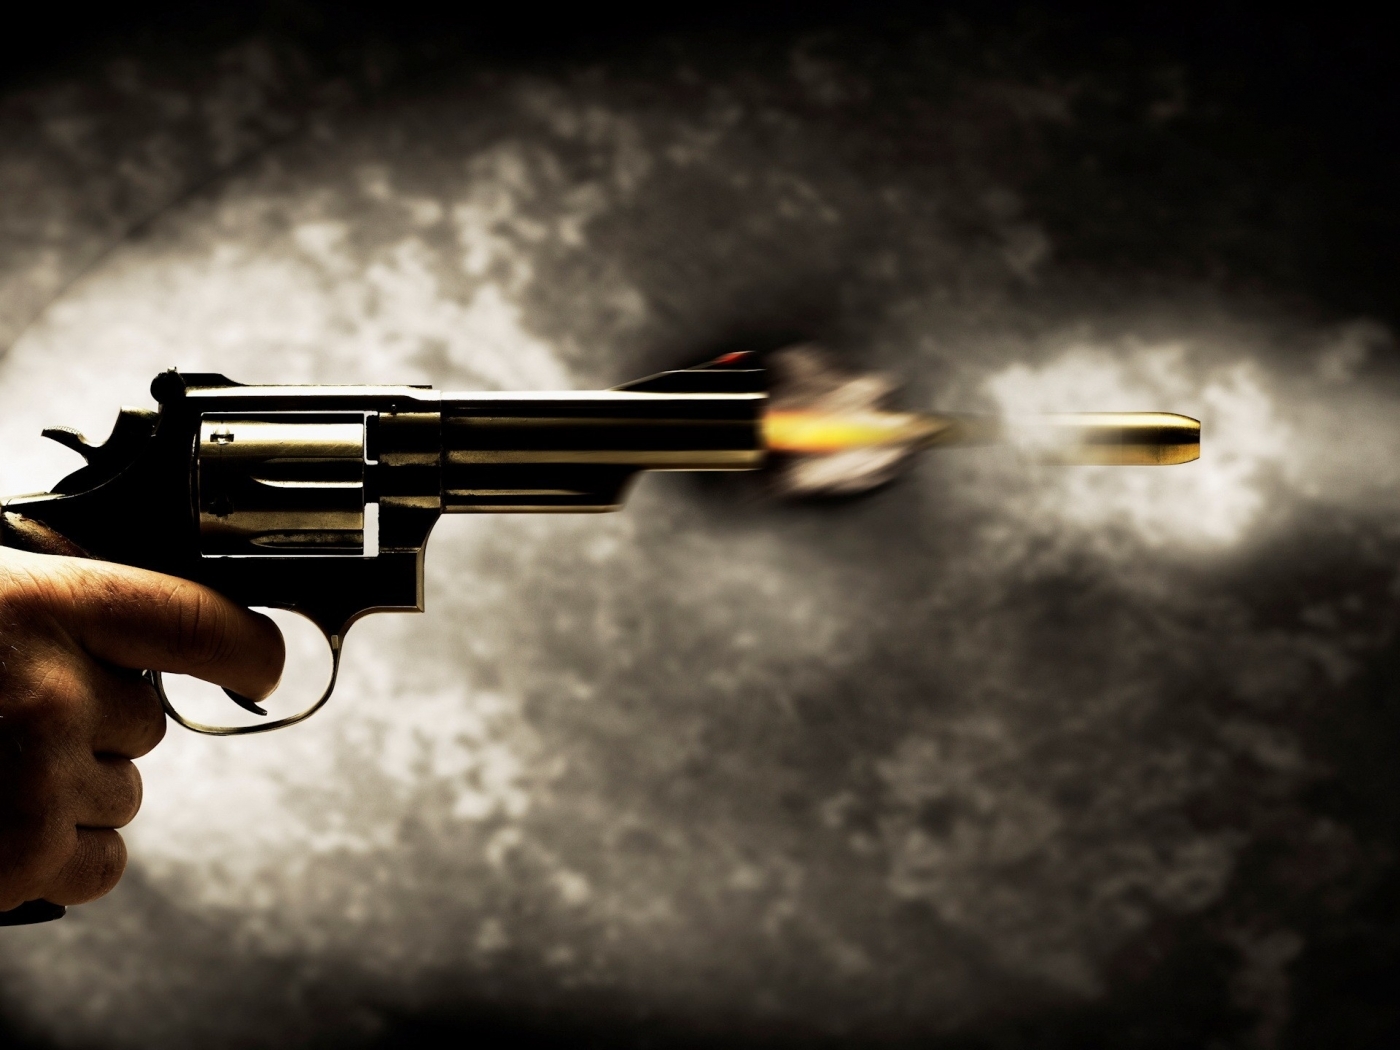 46549 download wallpaper weapon, objects screensavers and pictures for free